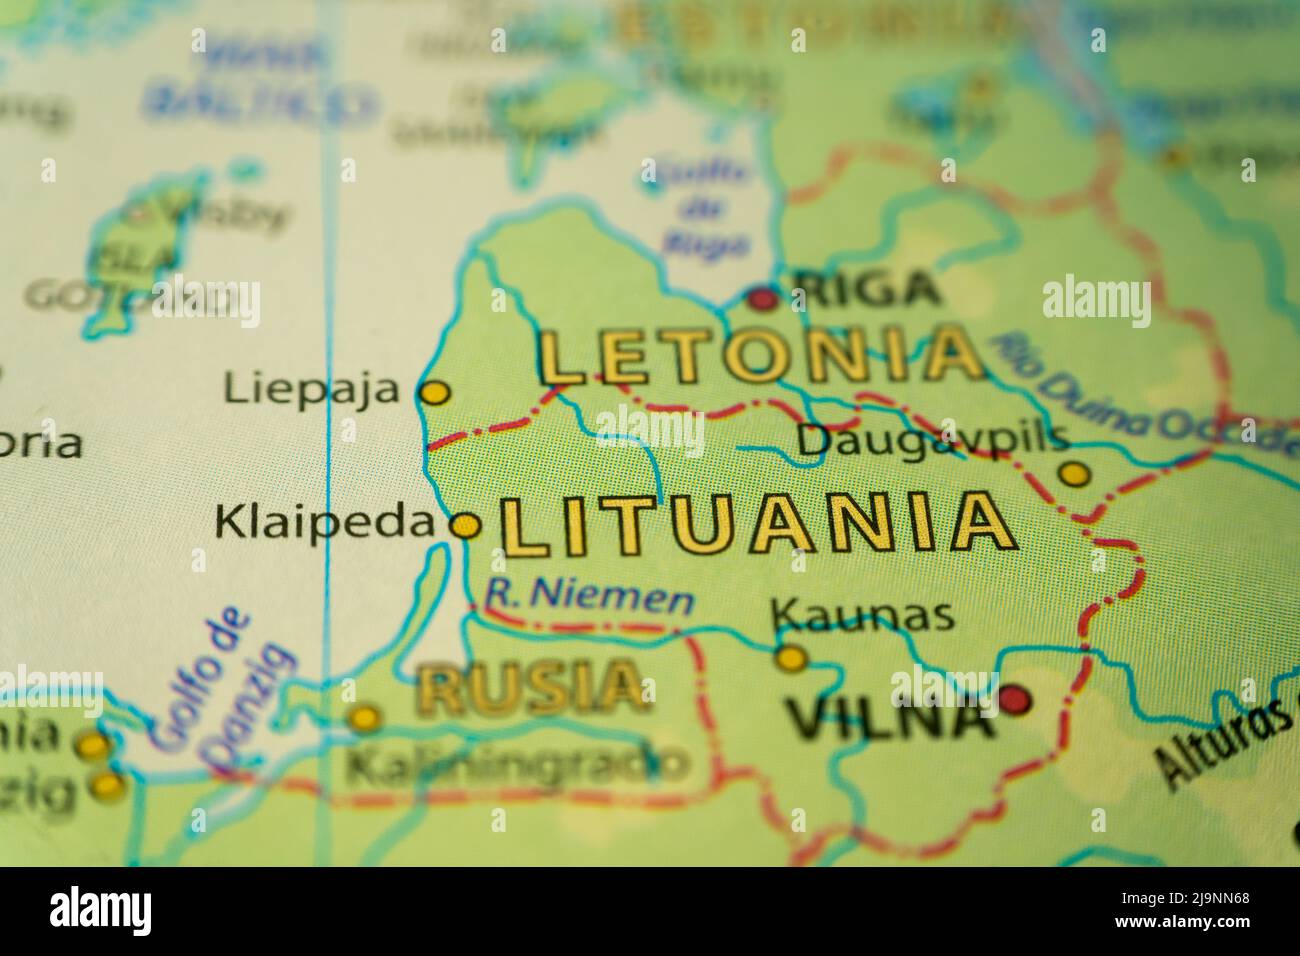 Orographic map of Lithuania and Estonia in the Baltic Sea. With references in Spanish. Concept of cartography, travel, tourism, geography. Differentia Stock Photo